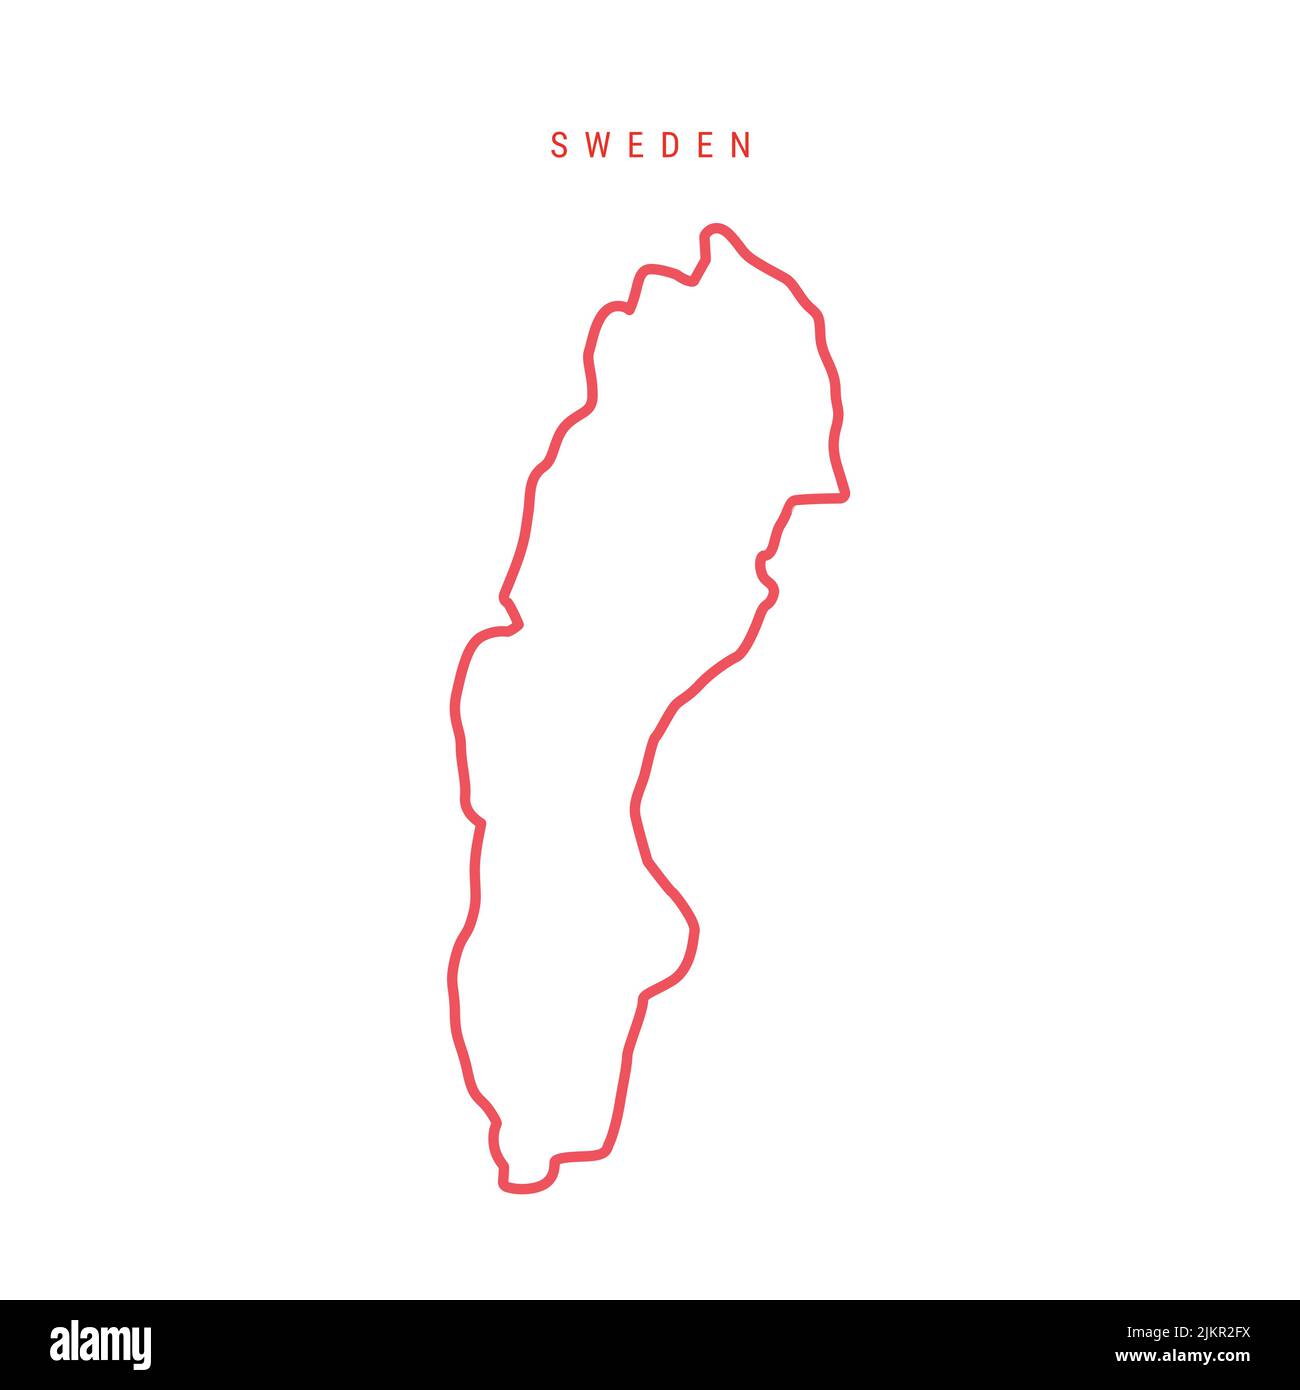 Sweden editable outline map. Swedish red border. Country name. Adjust line weight. Change to any color. Vector illustration. Stock Vector